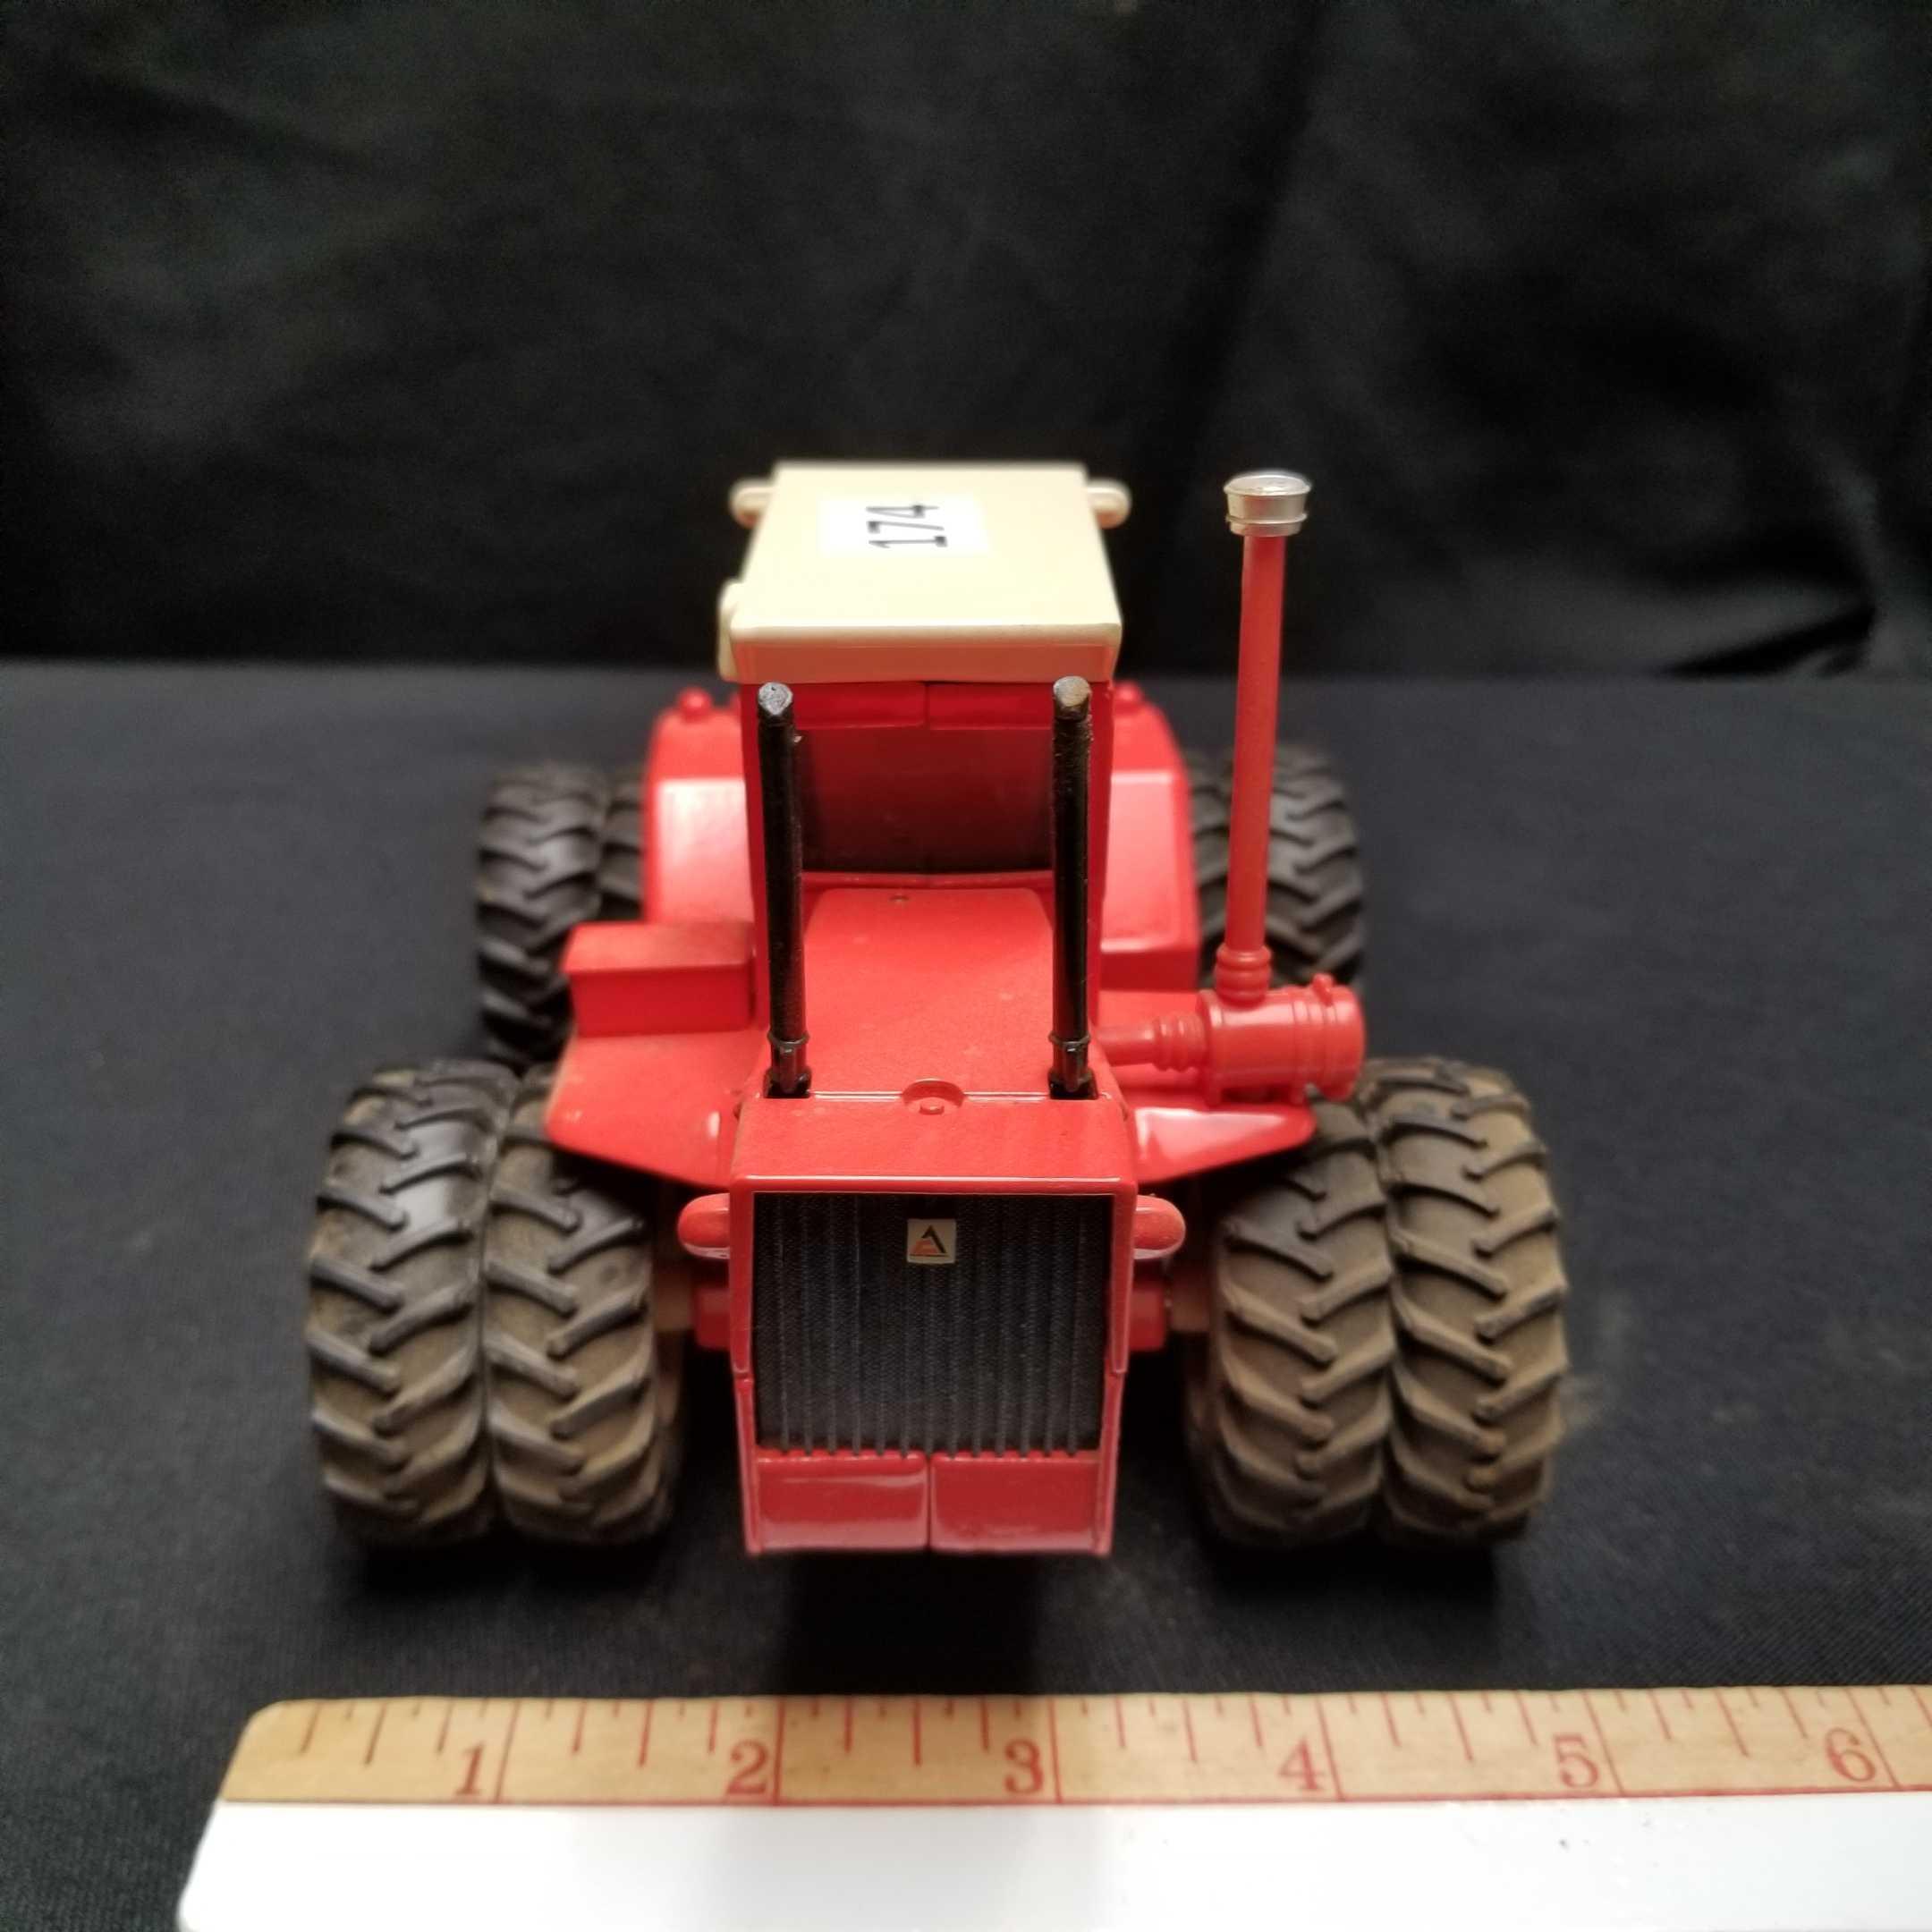 1/32nd Scale ALLIS CHALMERS "AC 440" TRACTOR CAB 4WD DUALS